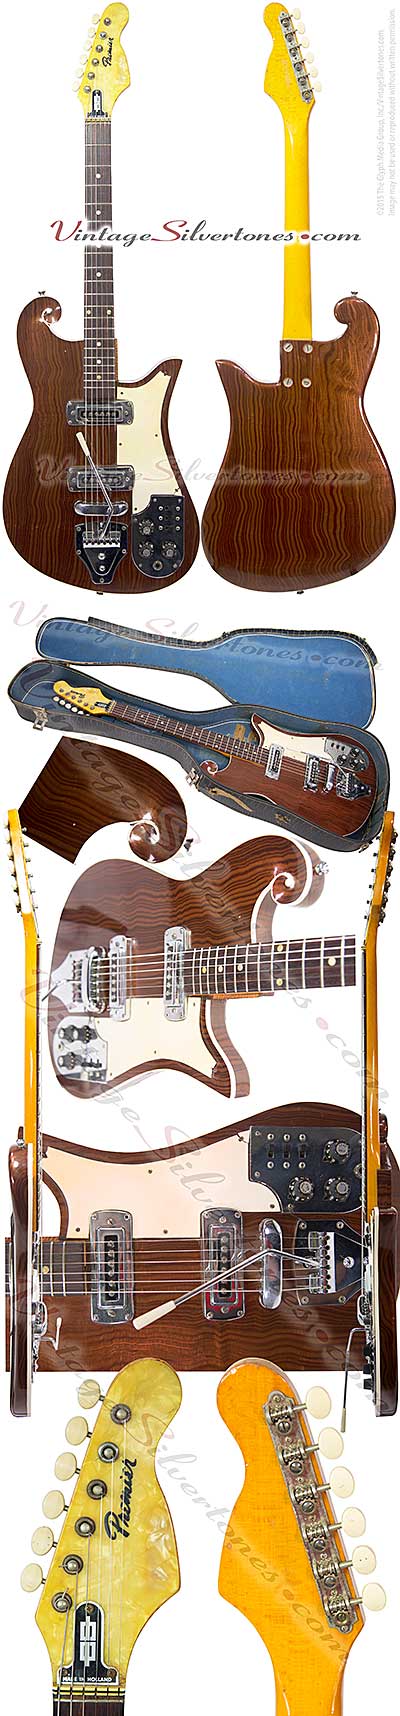 Multivox Premier, scroll, burl walnut finish, double pickup, electric guitar, solid body, ivoroid binding, made in 1966